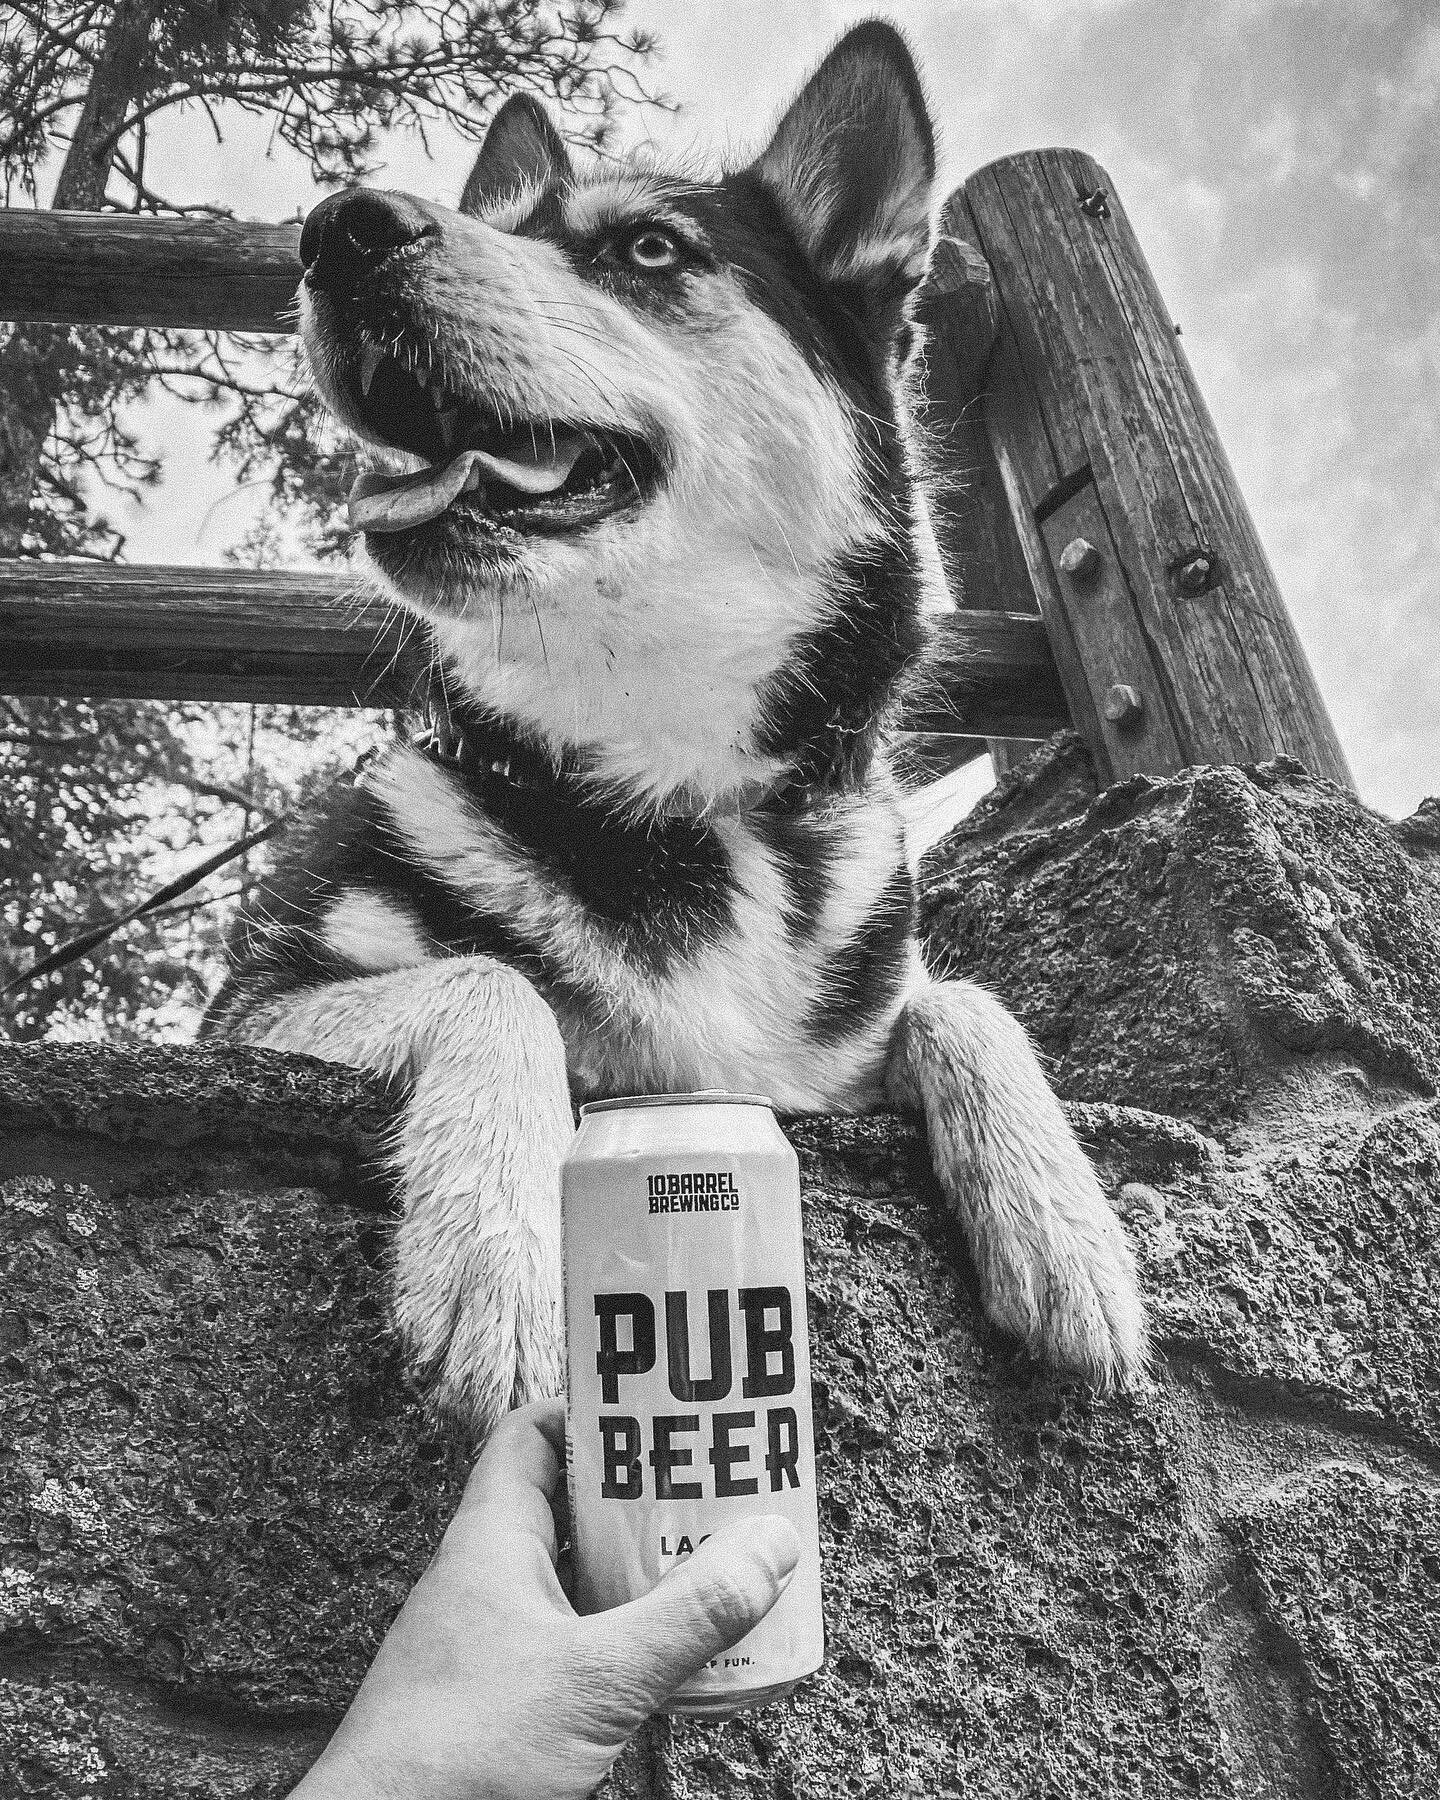 This one&rsquo;s to slamming a pubby with your dawgs 🍻 

#cheapfunbeer